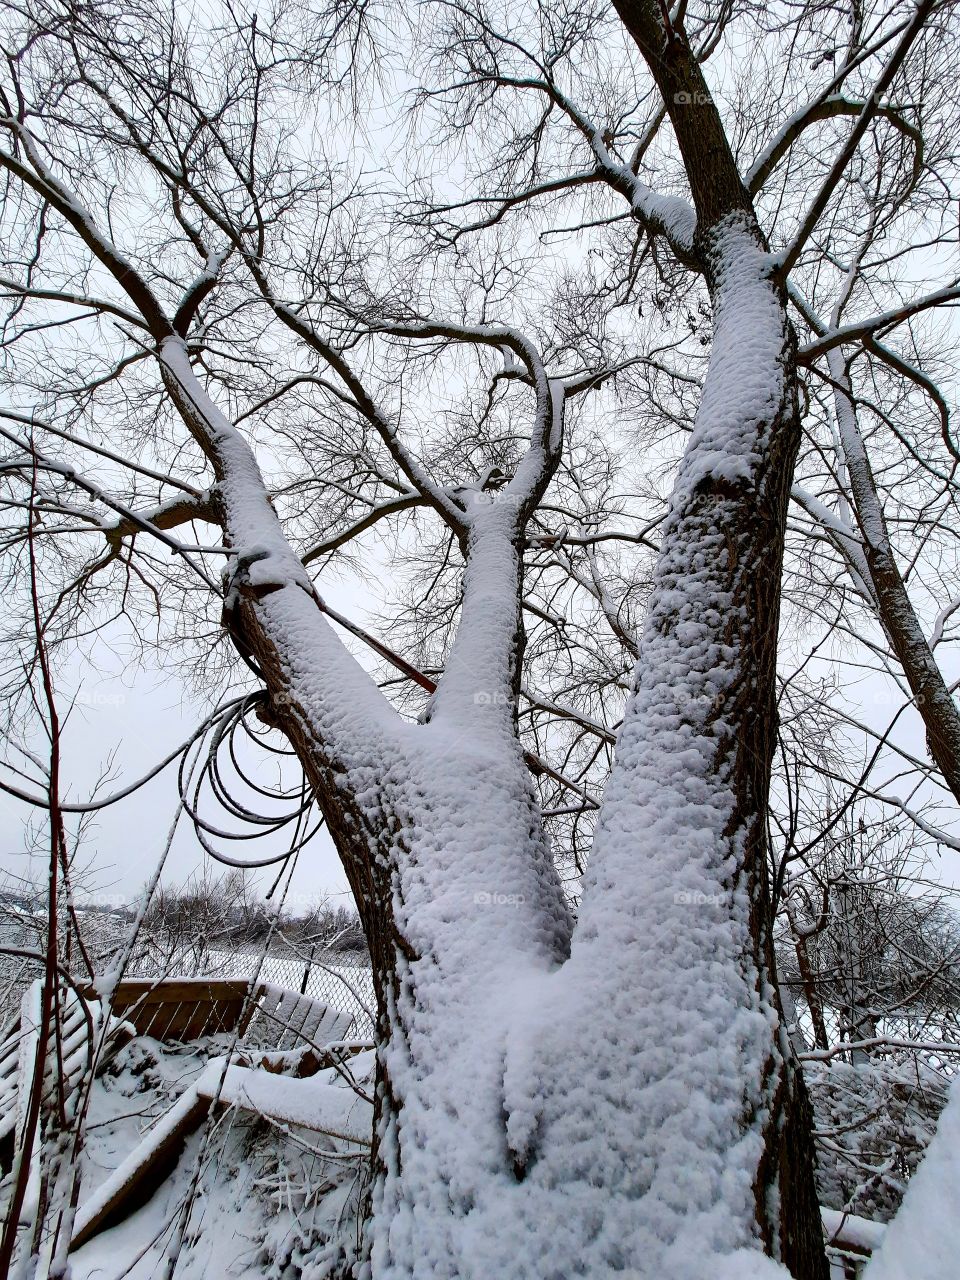 power of tree -  snow covered  branches of a willow tree